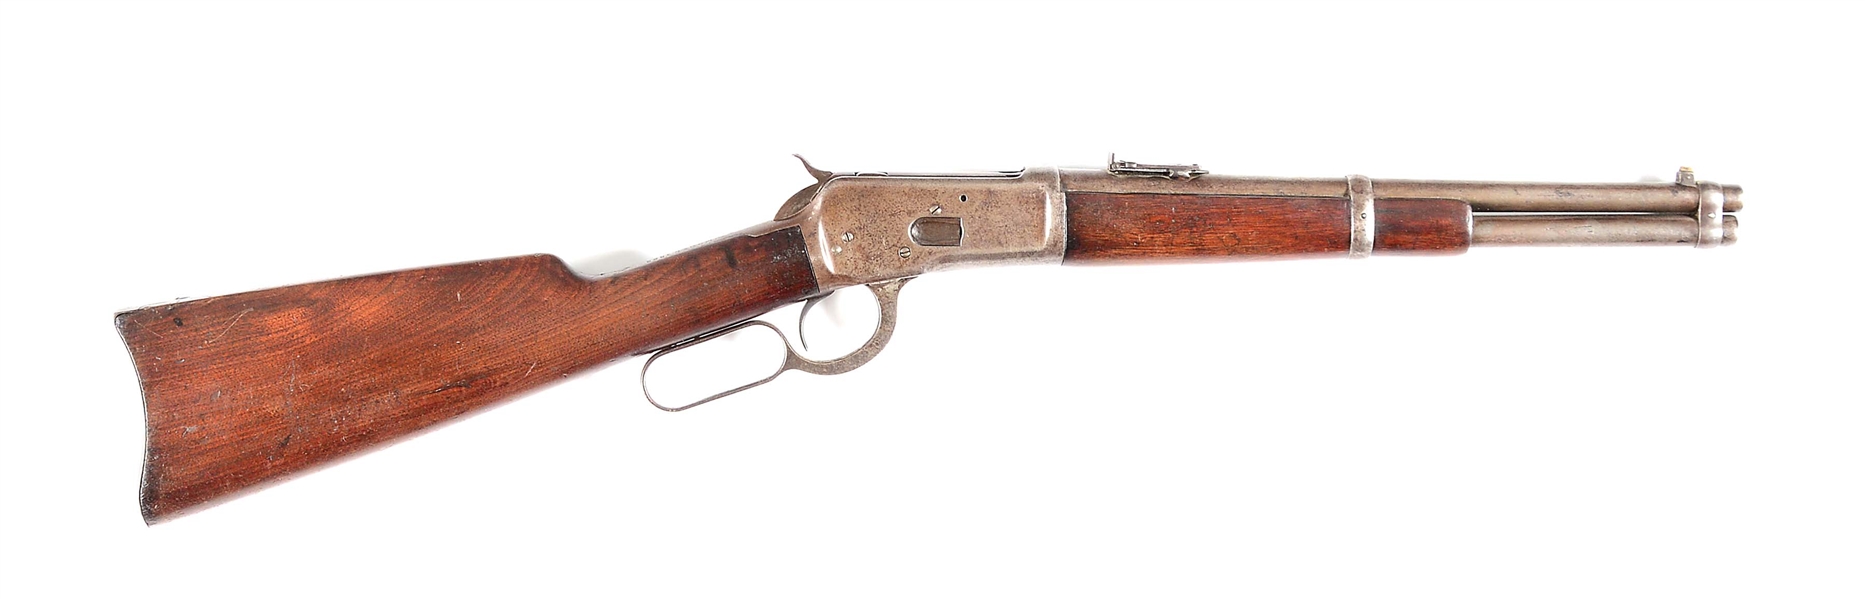 (C) WINCHESTER MODEL 1892 TRAPPER LEVER ACTION CARBINE WITH ATF EXEMPTION LETTER (1907).